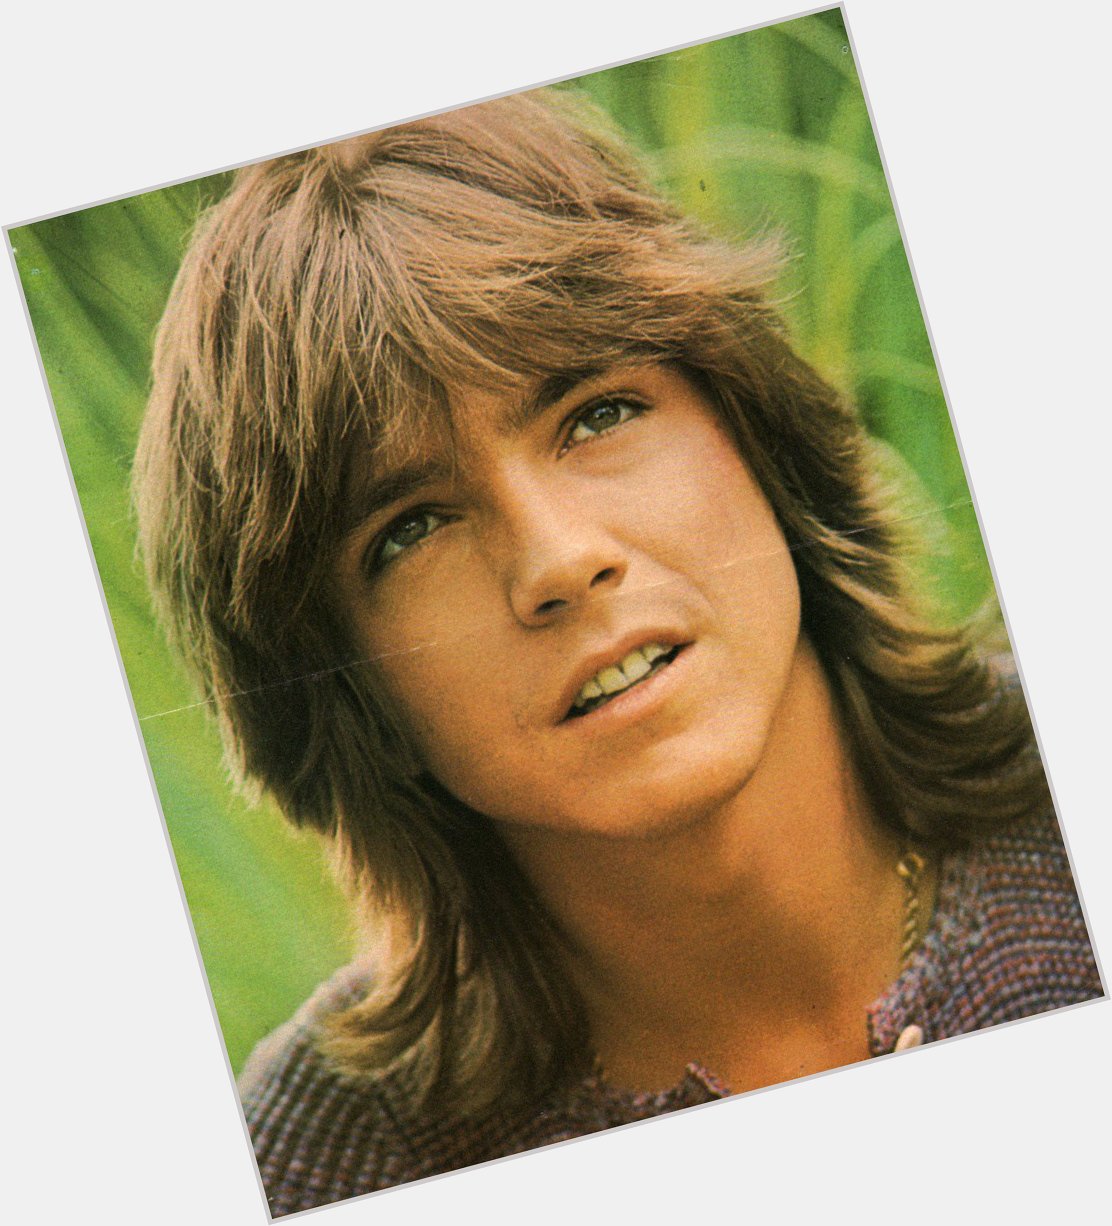 Happy Birthday David Cassidy who turns 67 today. One of the biggest teen idols of the 20th century. 